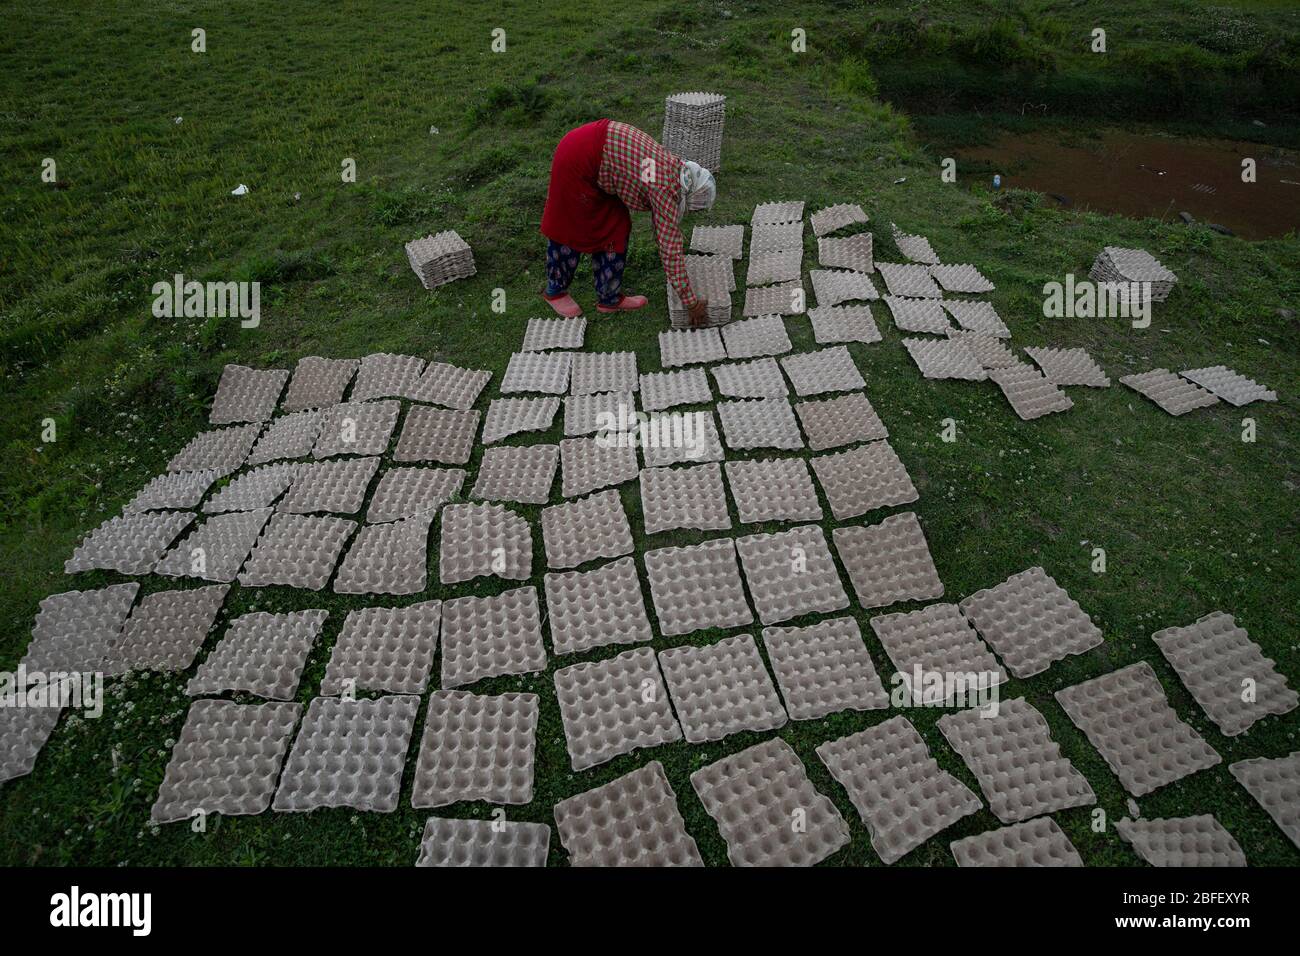 Kathmandu, Nepal. 18th Apr, 2020. A woman collects egg crates from the sun during lockdown.Twenty sixth day of a nationwide lockdown imposed by the government amid concerns about the spread of the coronavirus disease (COVID-19). Credit: SOPA Images Limited/Alamy Live News Stock Photo